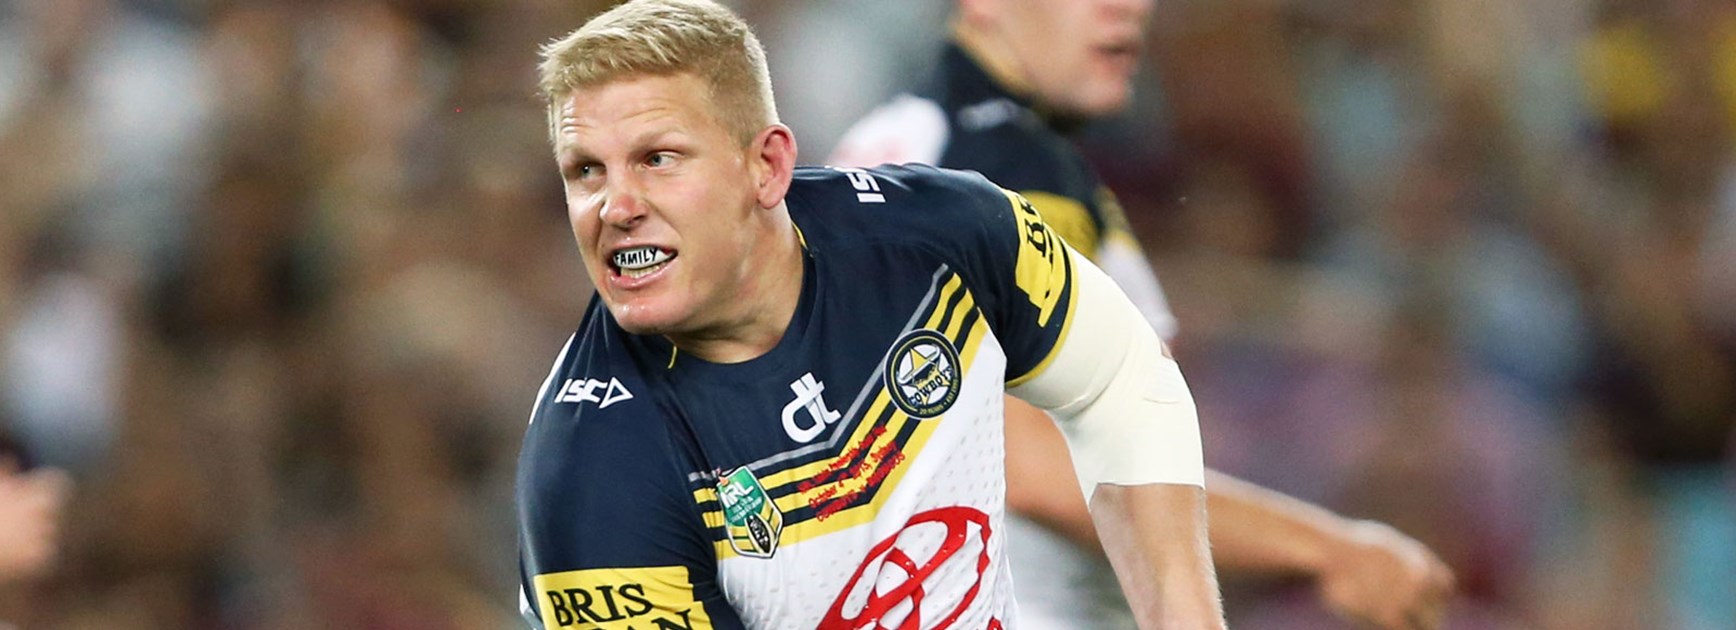 Cowboys prop Ben Hannant in action during the 2015 NRL grand final.